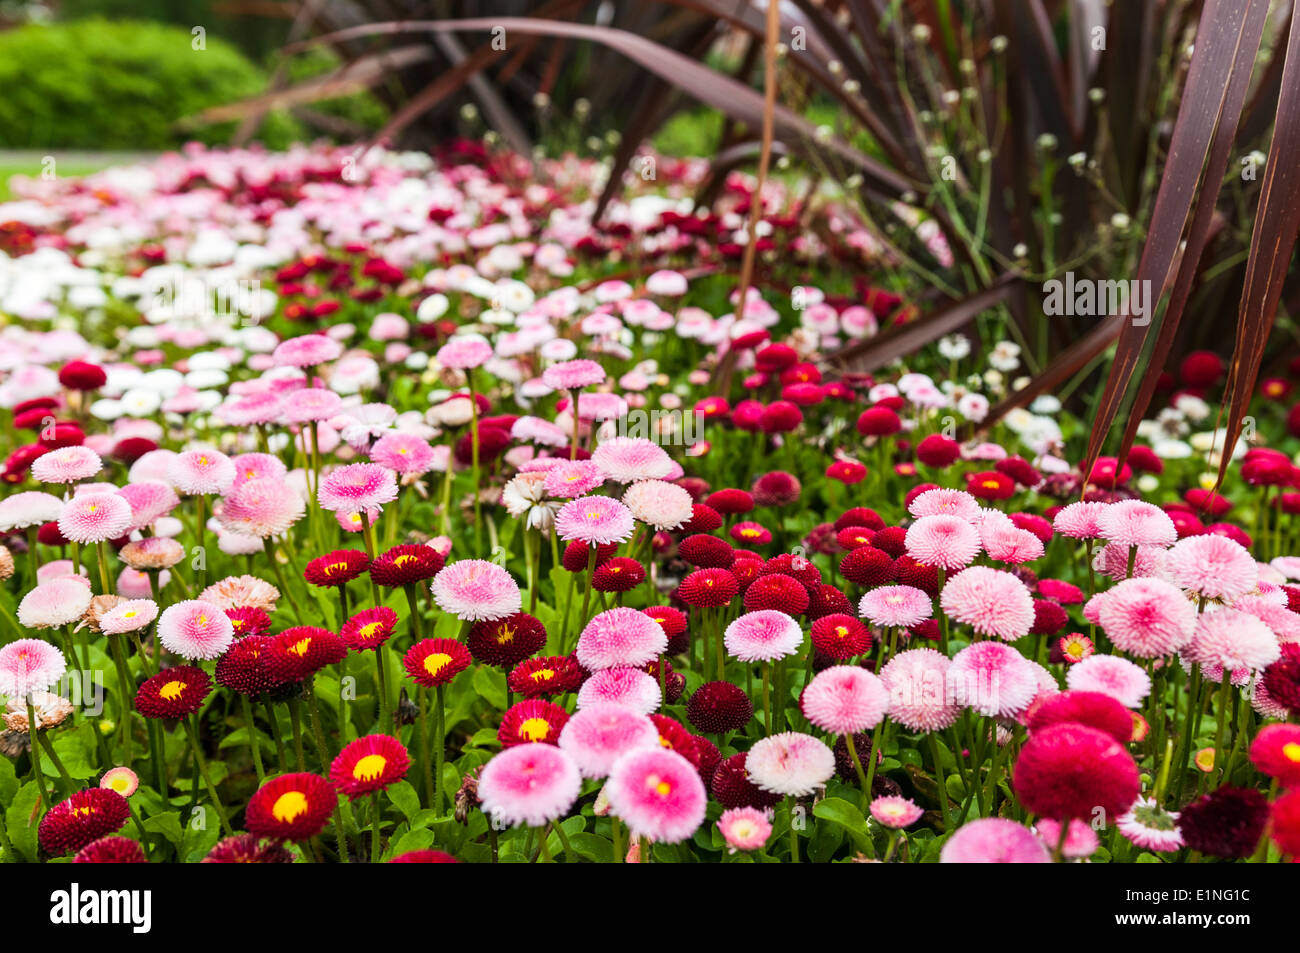 Red white and pink Pomponette daisies in a park flowerbed Stock Photo